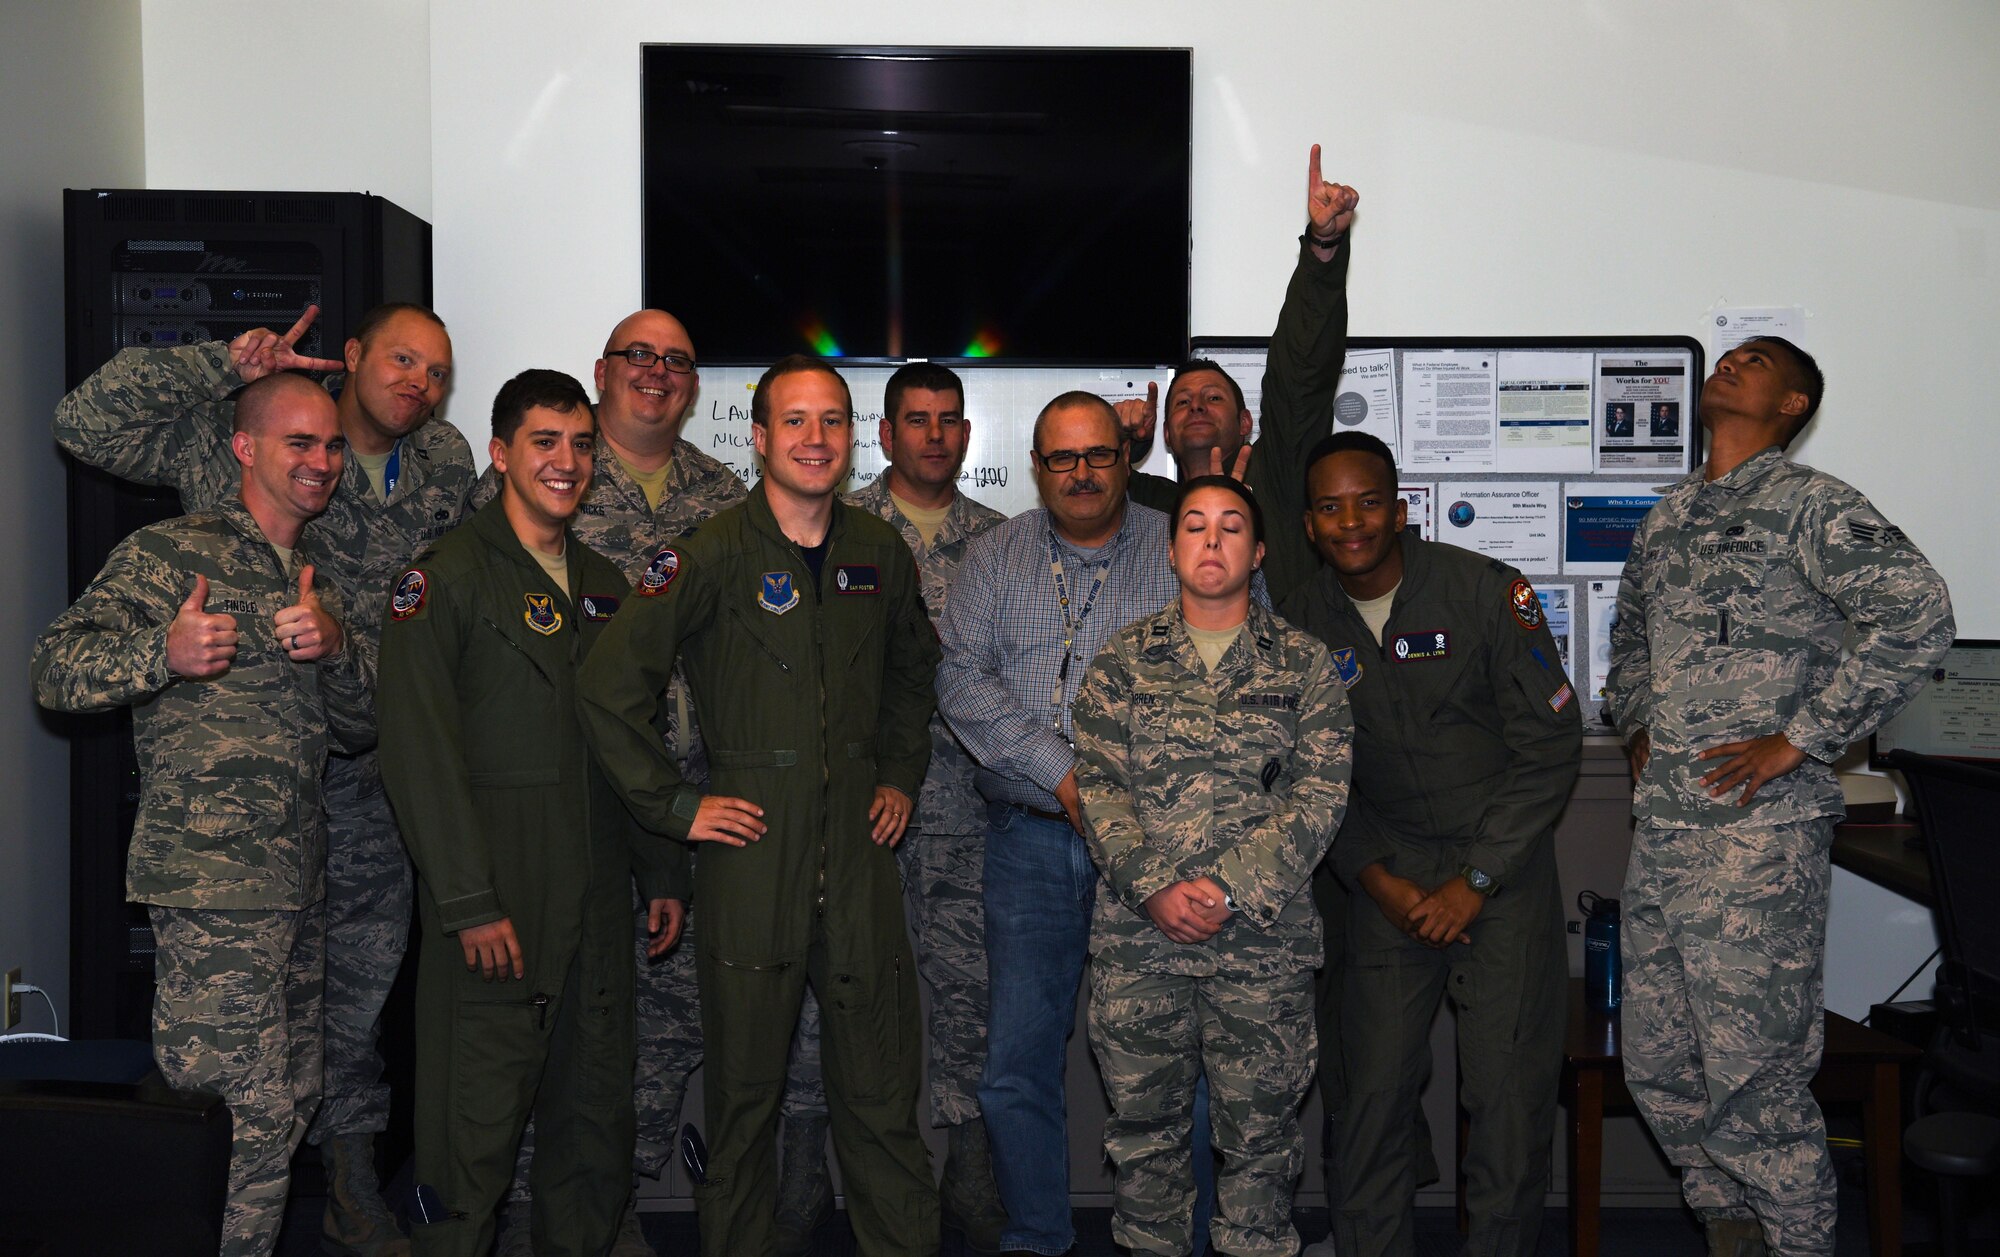 Members of the codes flight on F.E. Warren Air Force Base pose for a photo sept. 29, 2017. Through programming and requiring more than one person to control coded equipment, the codes flight directly contributes to F.E. Warren’s nuclear surety.